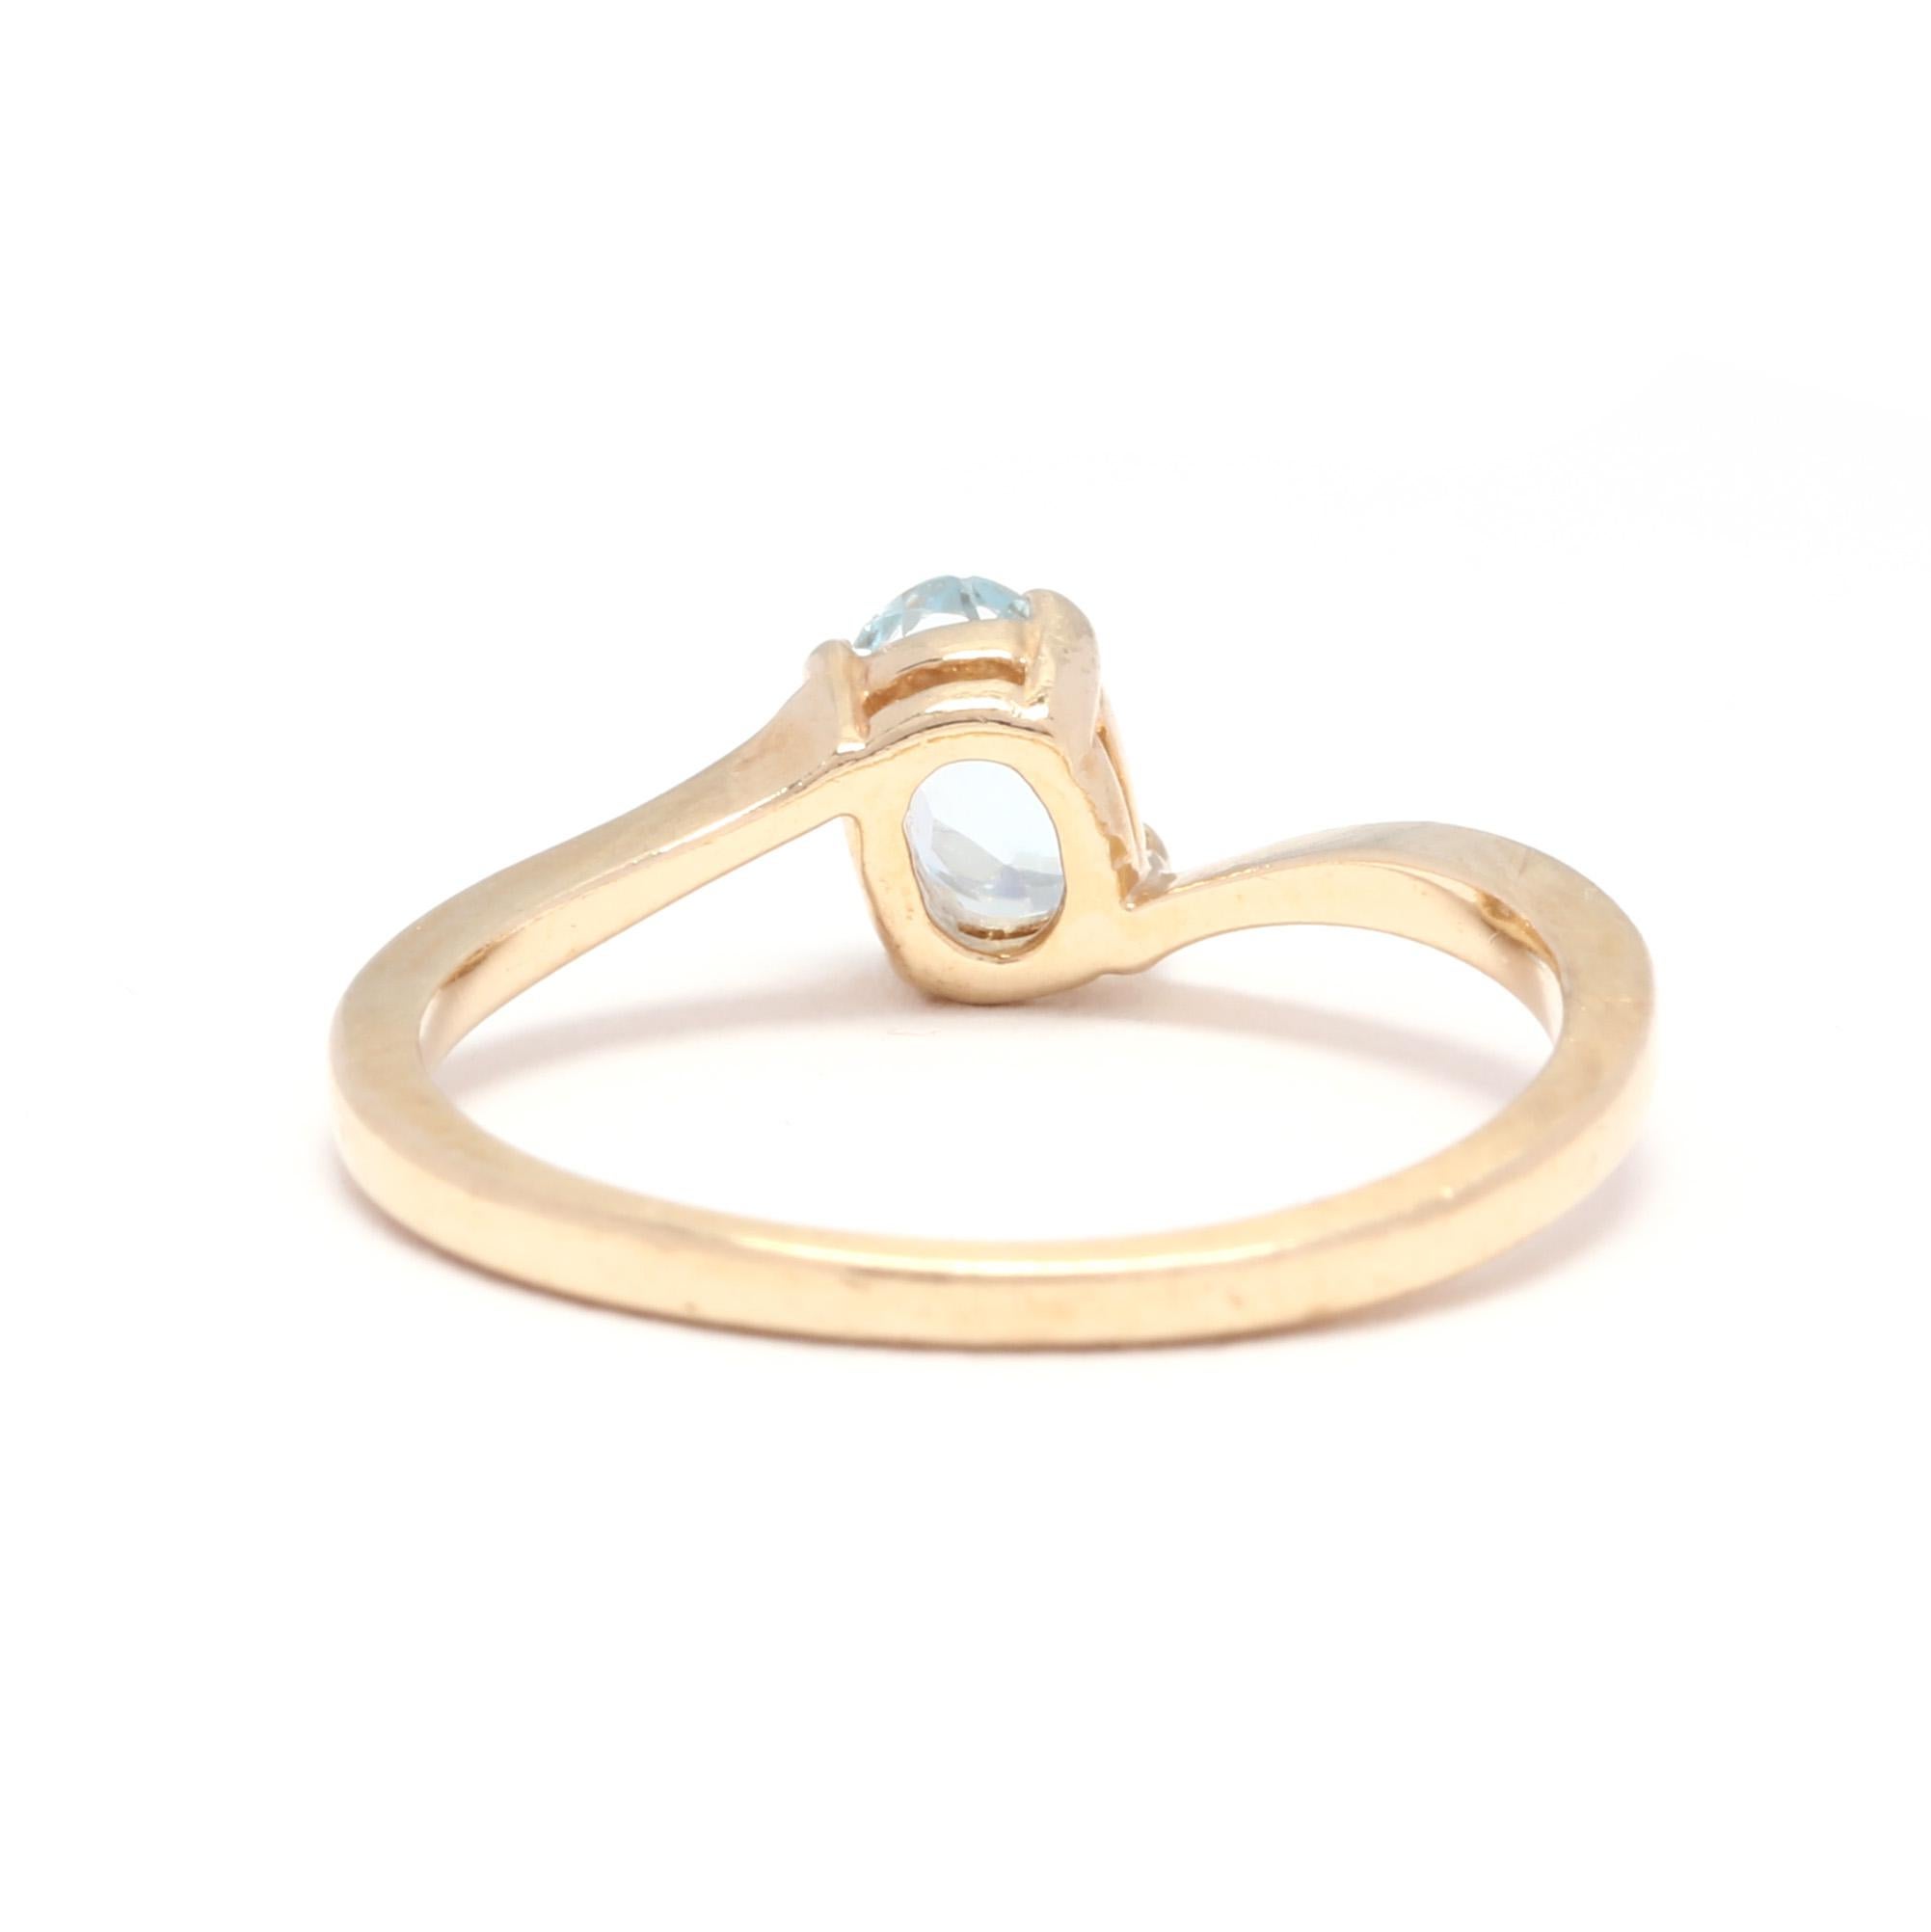 Oval Cut 14 Karat Yellow Gold and Blue Topaz Bypass Solitaire Ring